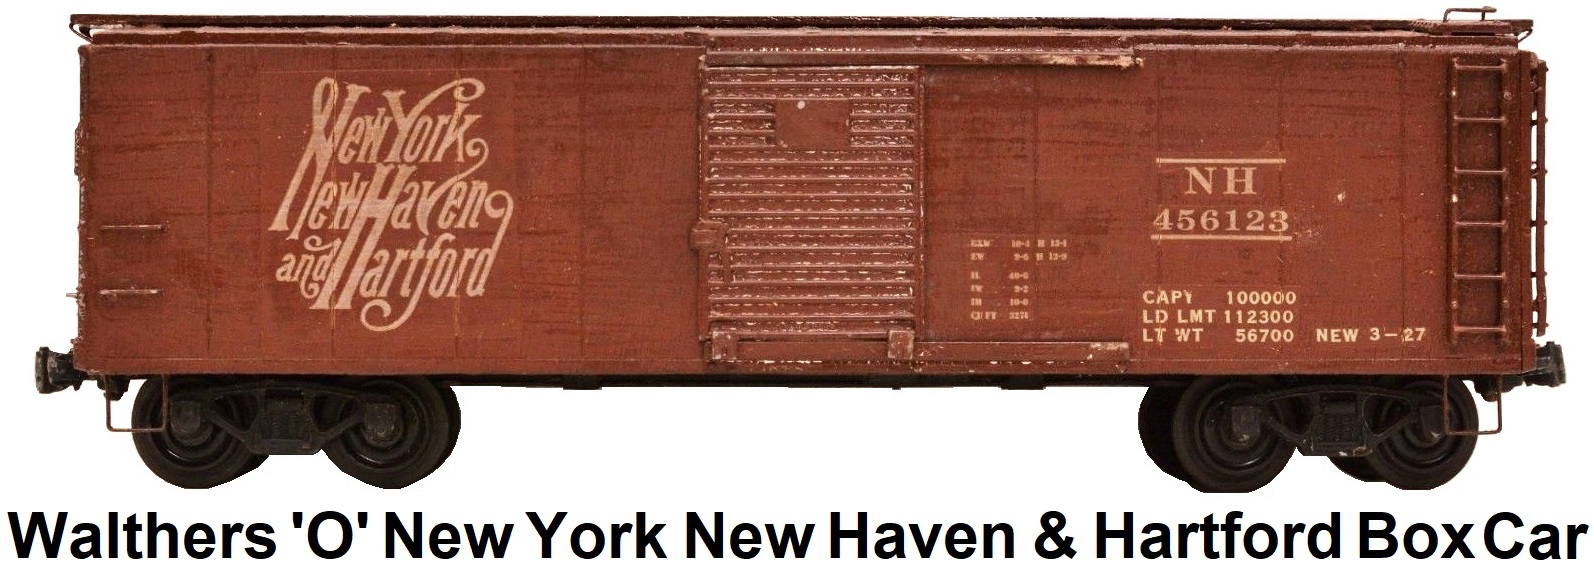 Walthers 'O' scale Kit-built Wood New York New Haven & Hartford Box Car